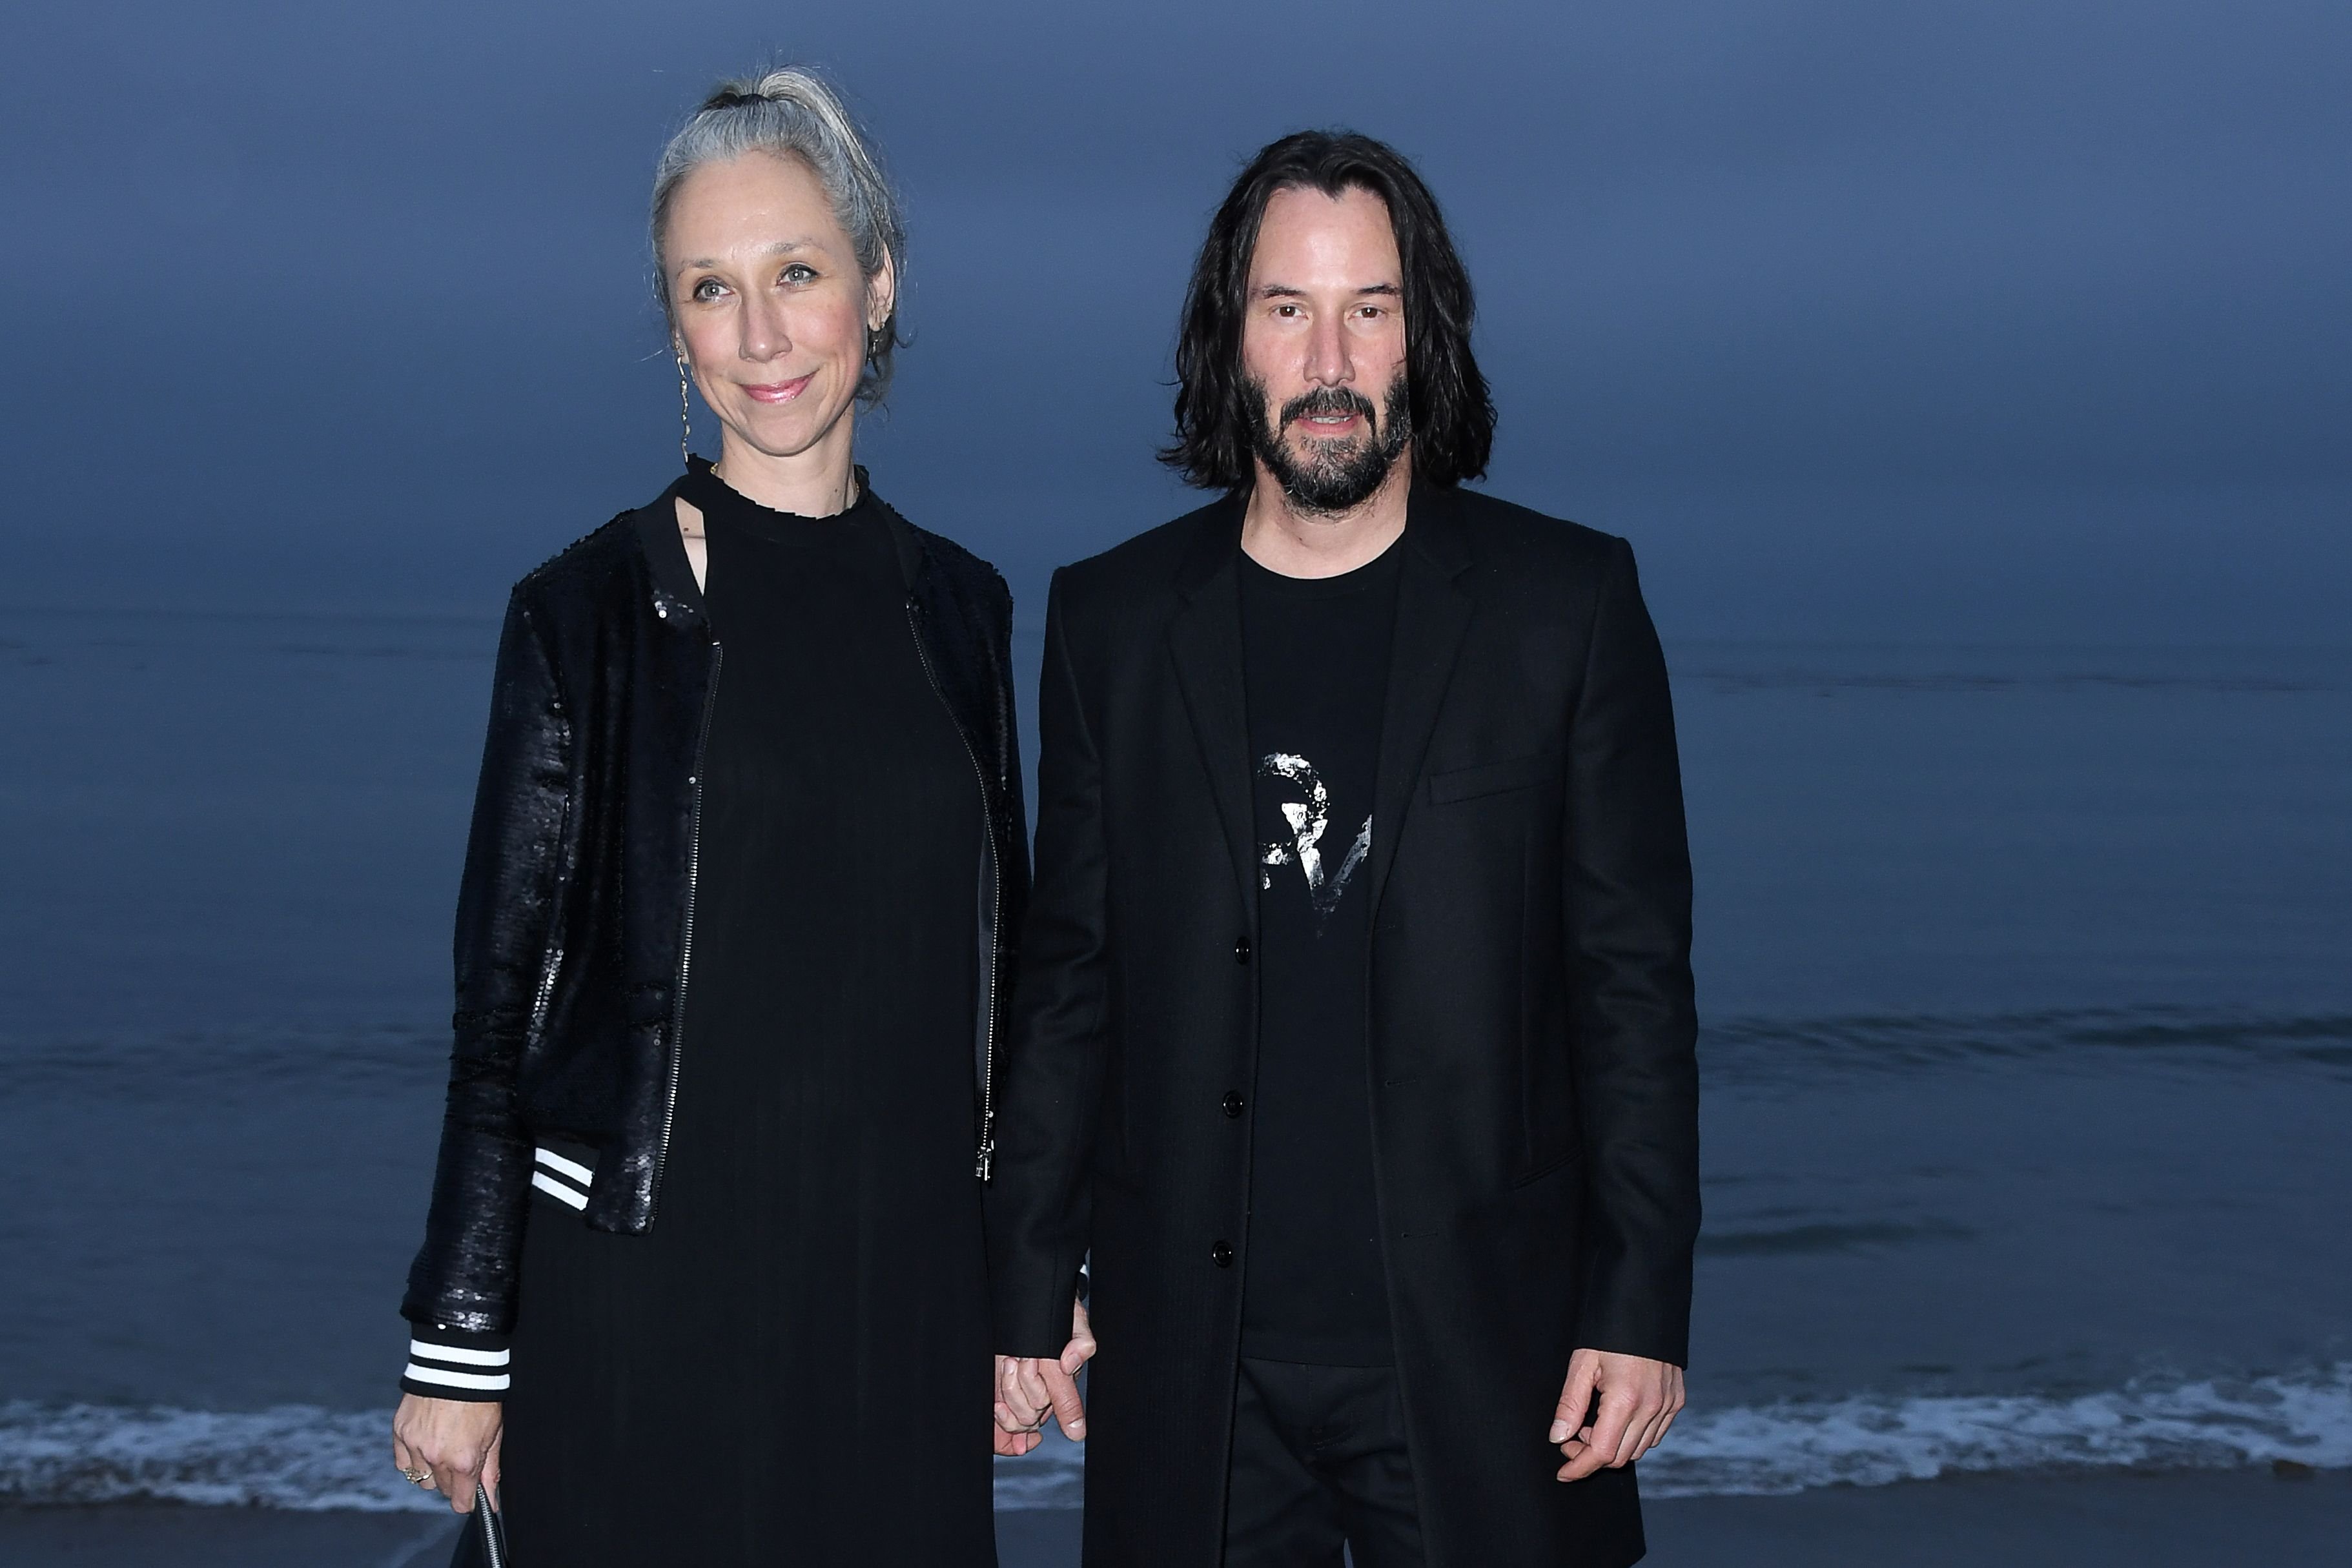 Keanu Reeves and his girlfriend, artist Alexandra Grant arriving for the Saint Laurent Men's Spring-Summer 2020 runway show on June 6, 2019 in Malibu, California. | Source: Getty Images